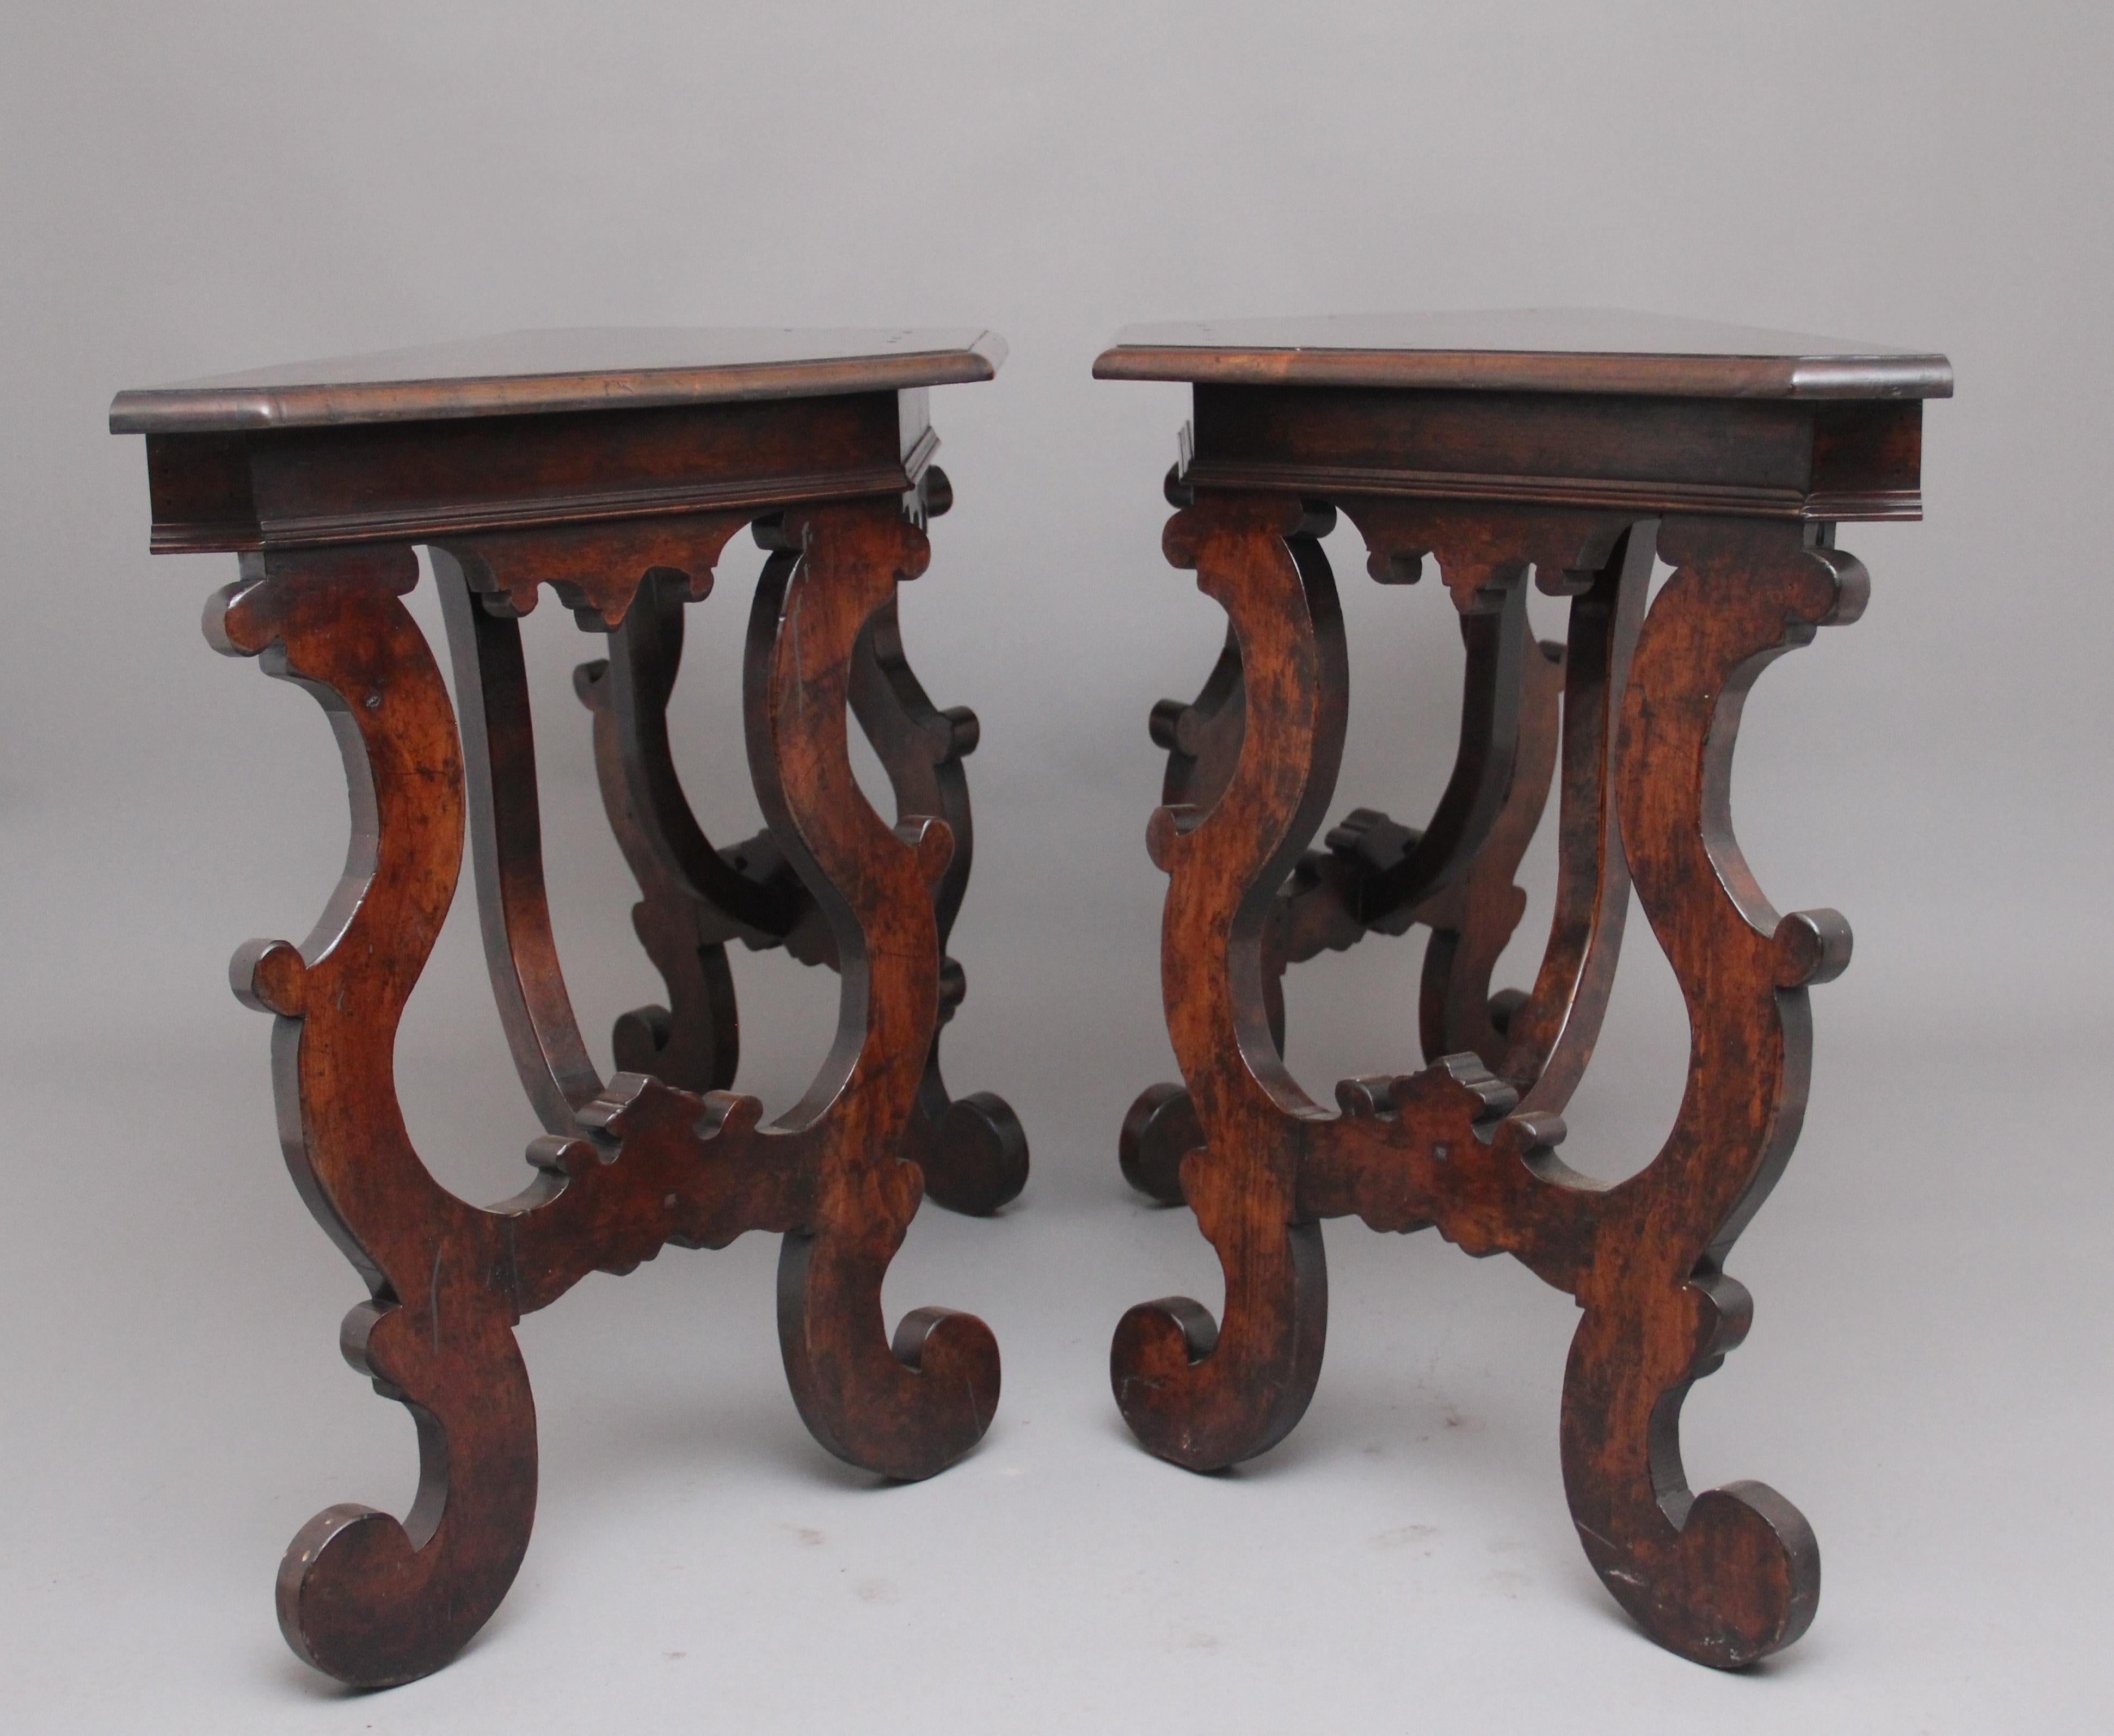 A pair of early 20th century Spanish walnut consul tables in the 18th century style, having a moulded edge top with nice figuration above a frieze with double D moulding, nice shaped apron below, supported on decorative shaped legs very much in the